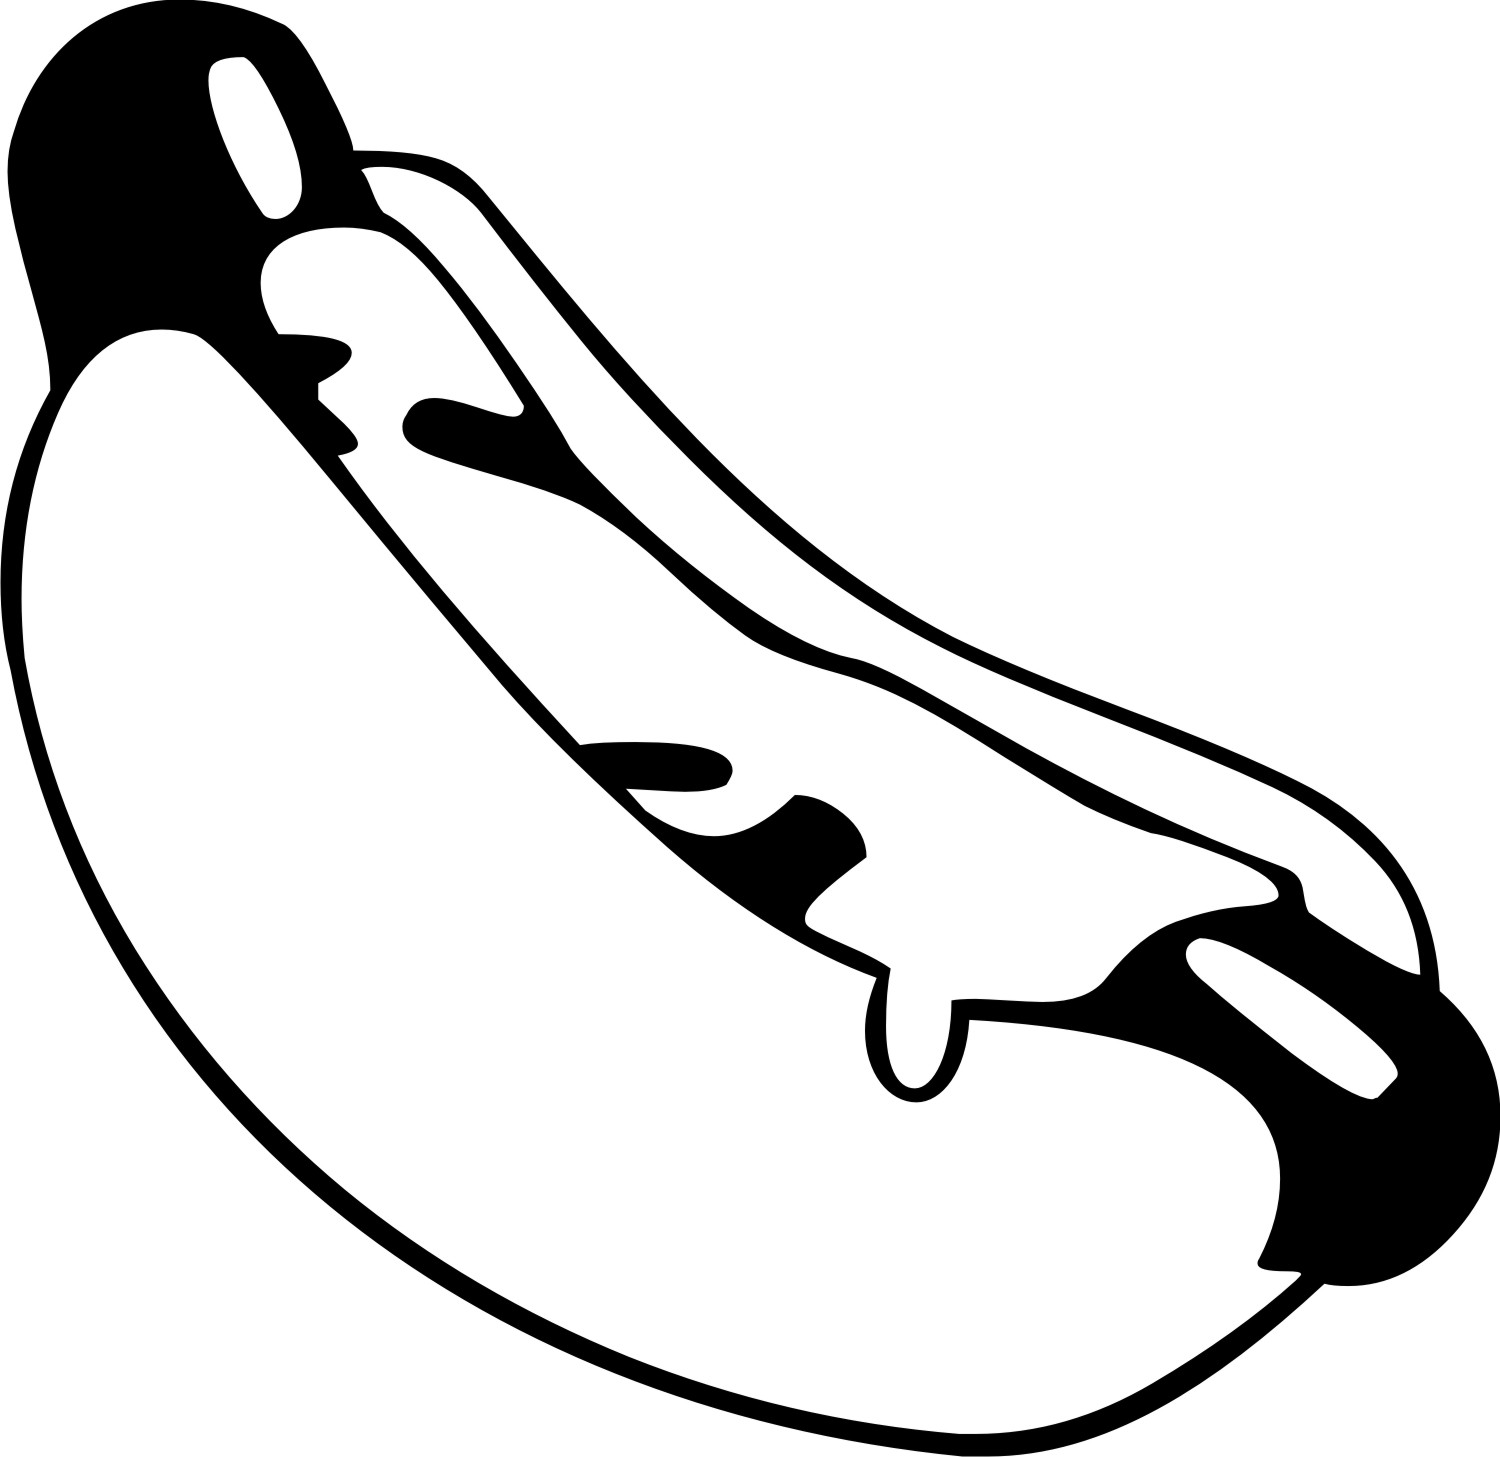 Free Hot Dog Clip Art Black And White, Download Free Hot Dog Clip Art Black  And White Png Images, Free Cliparts On Clipart Library